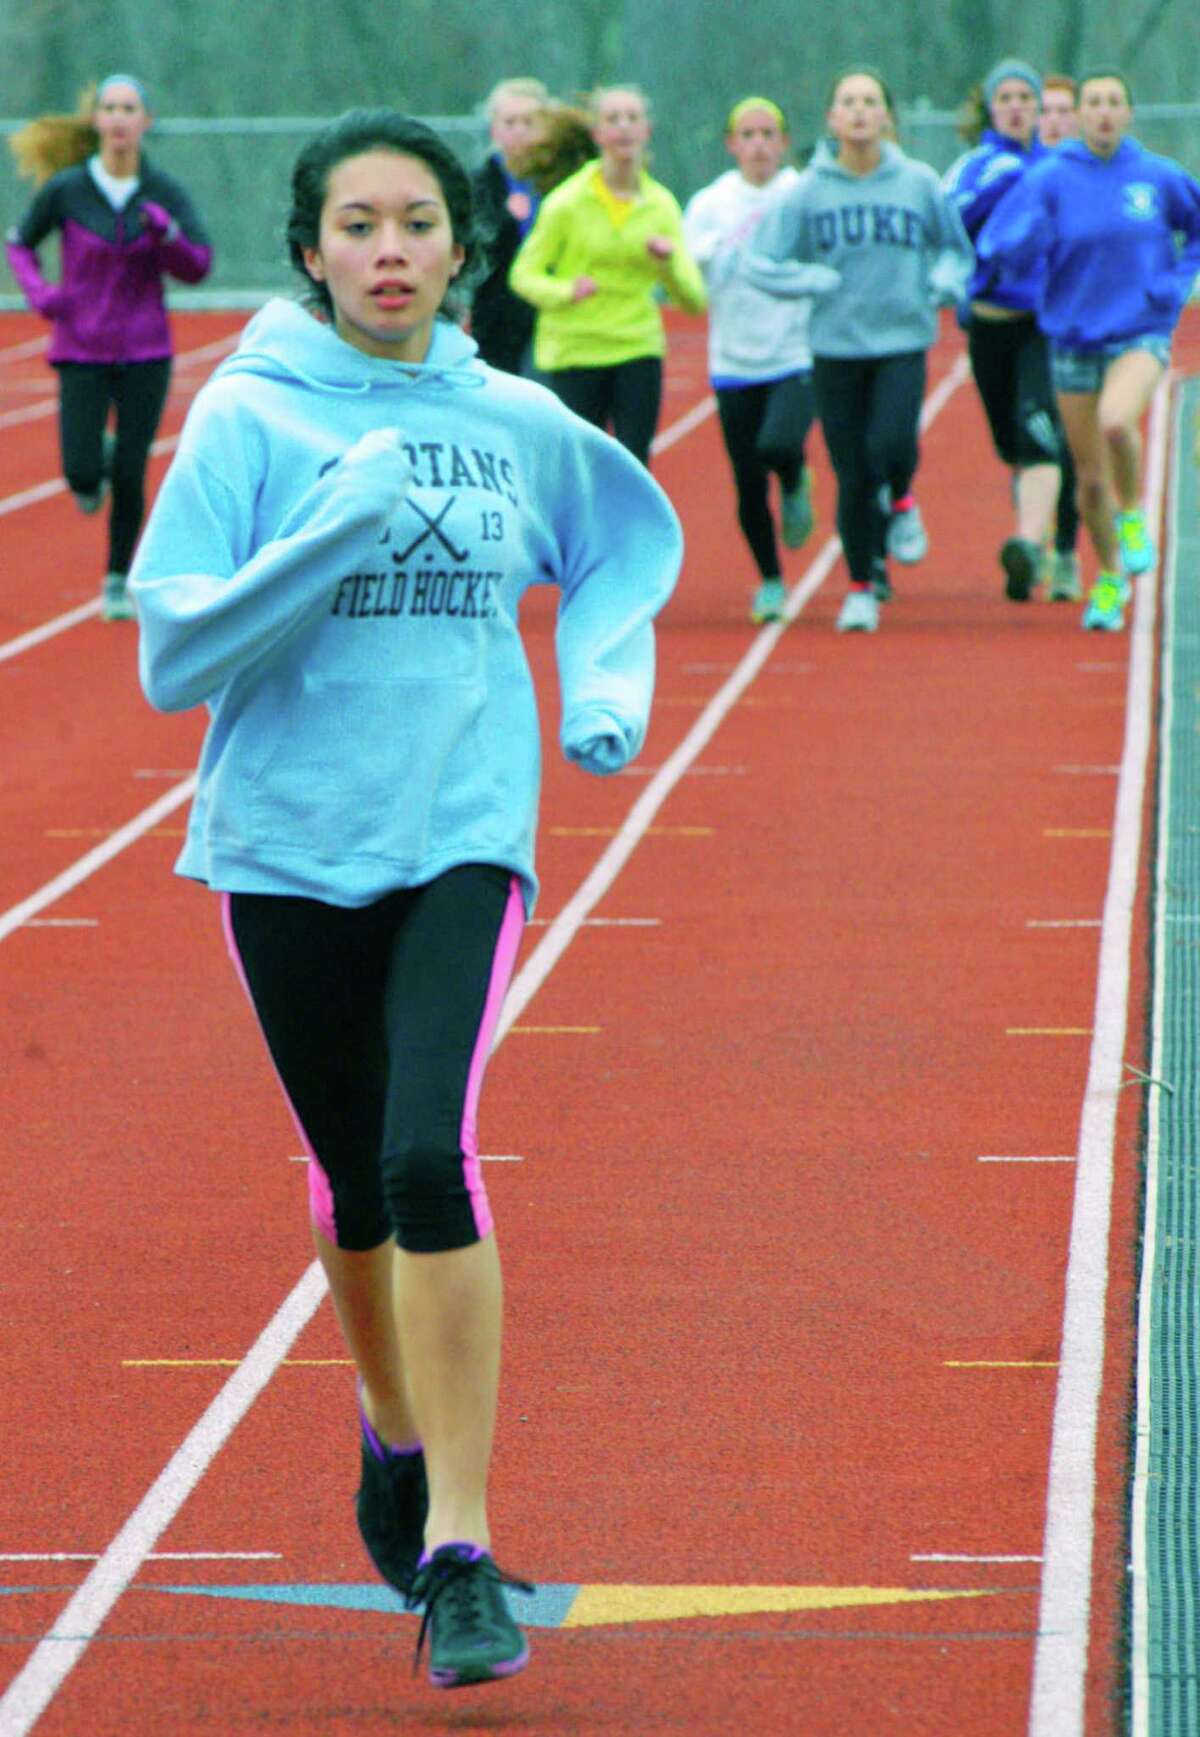 The Spartans' Tia Phon keeps a brisk pace during pre-season prep for the Shepaug Valley High School girls' track season. April 2014